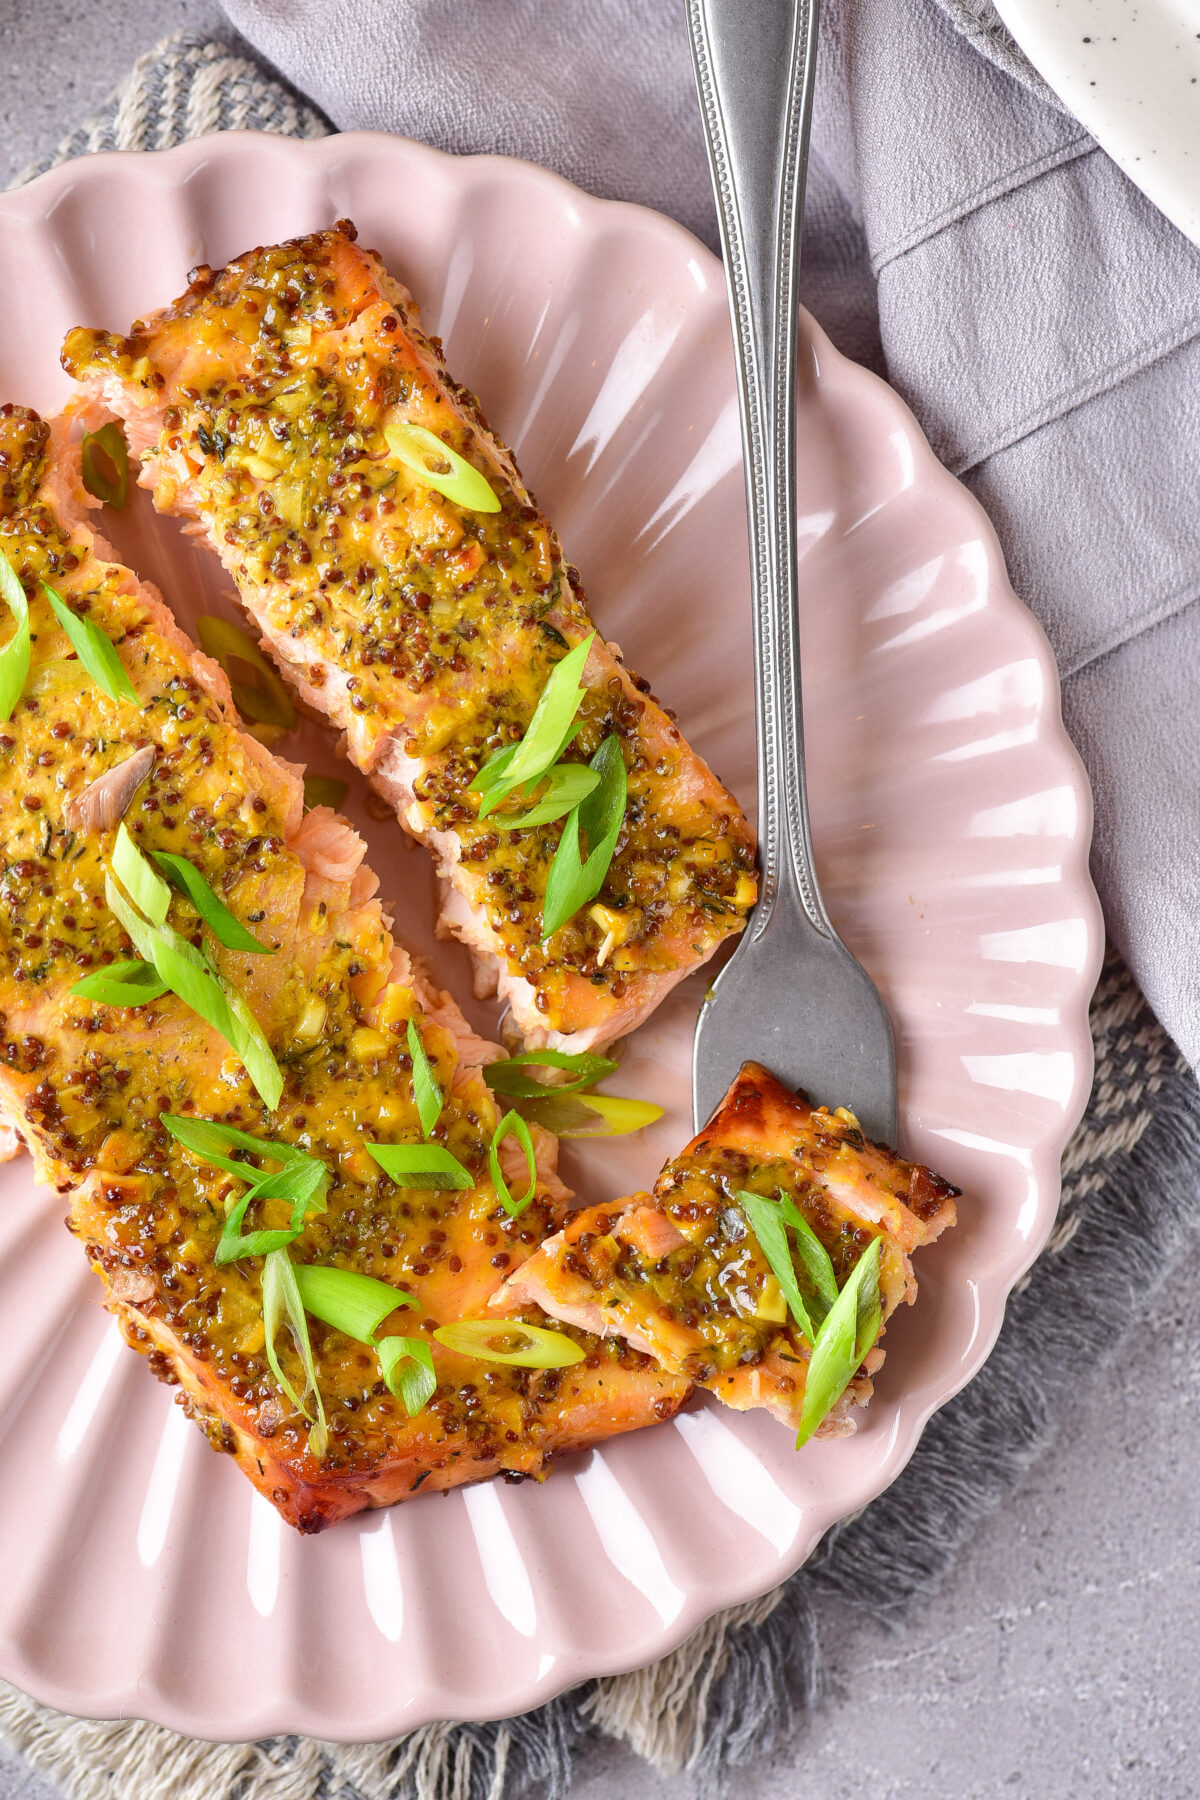 Dive into our Baked Honey Mustard Salmon recipe - a deliciously simple dinner idea! Perfectly seasoned for a mouthwatering meal every time.